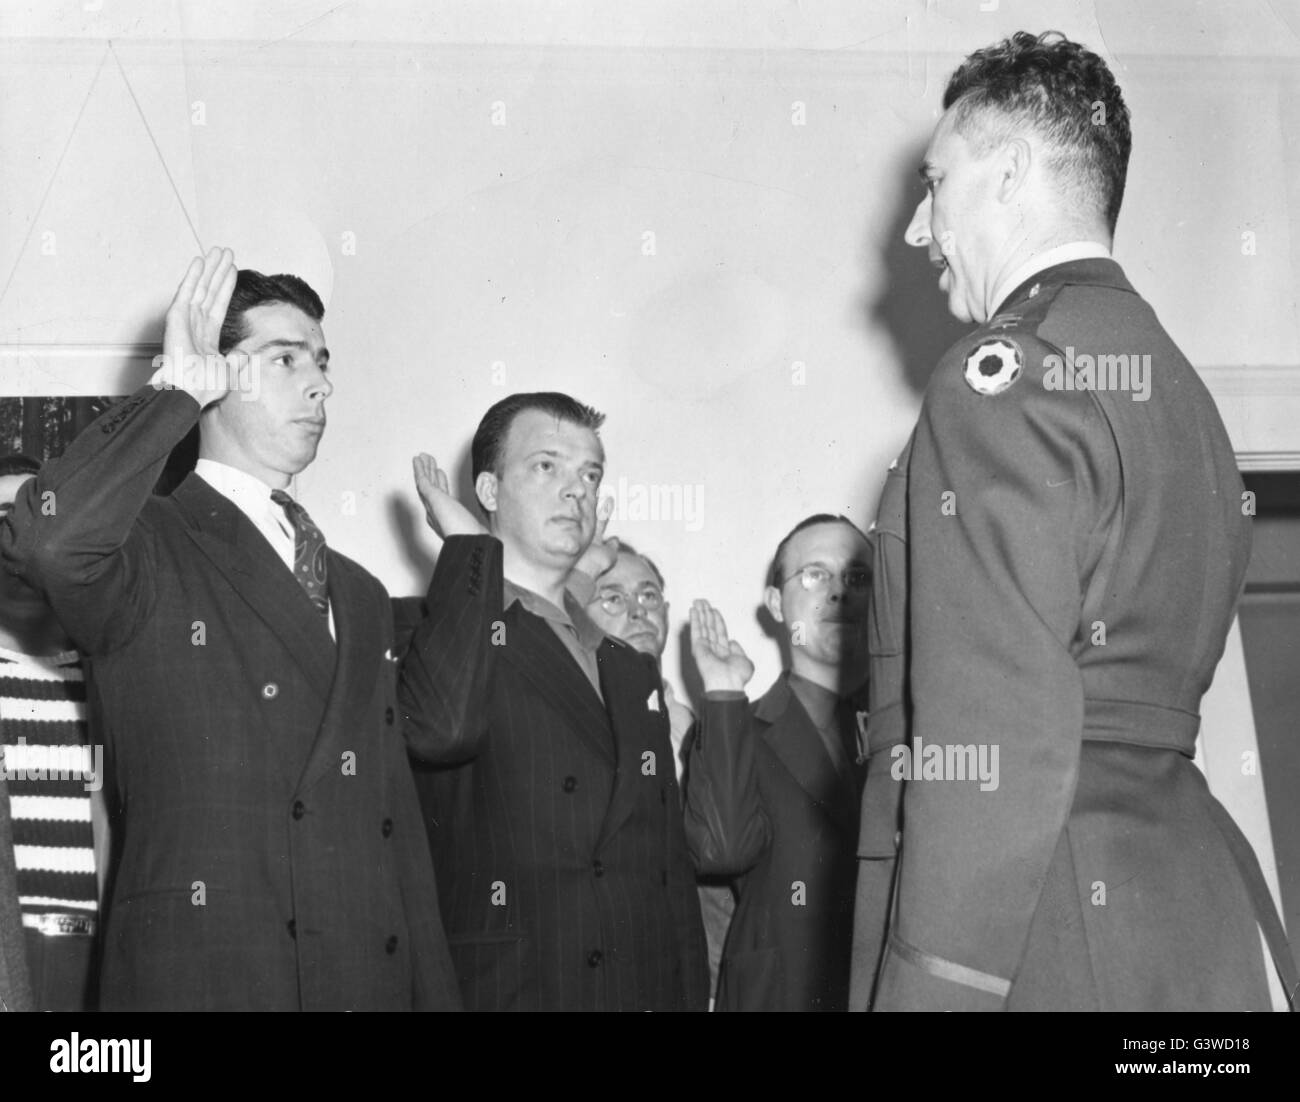 Joe DiMaggio, left, former home run king and outfielder of the NY Yankees, is sworn into the US Army with other inductees by Capt M.A. Branson, right, at an induction center on the West Coast. Joe's induction shrinks his income from a baseball salary of $50,000 a year to the $50 a month as a buck private. Stock Photo